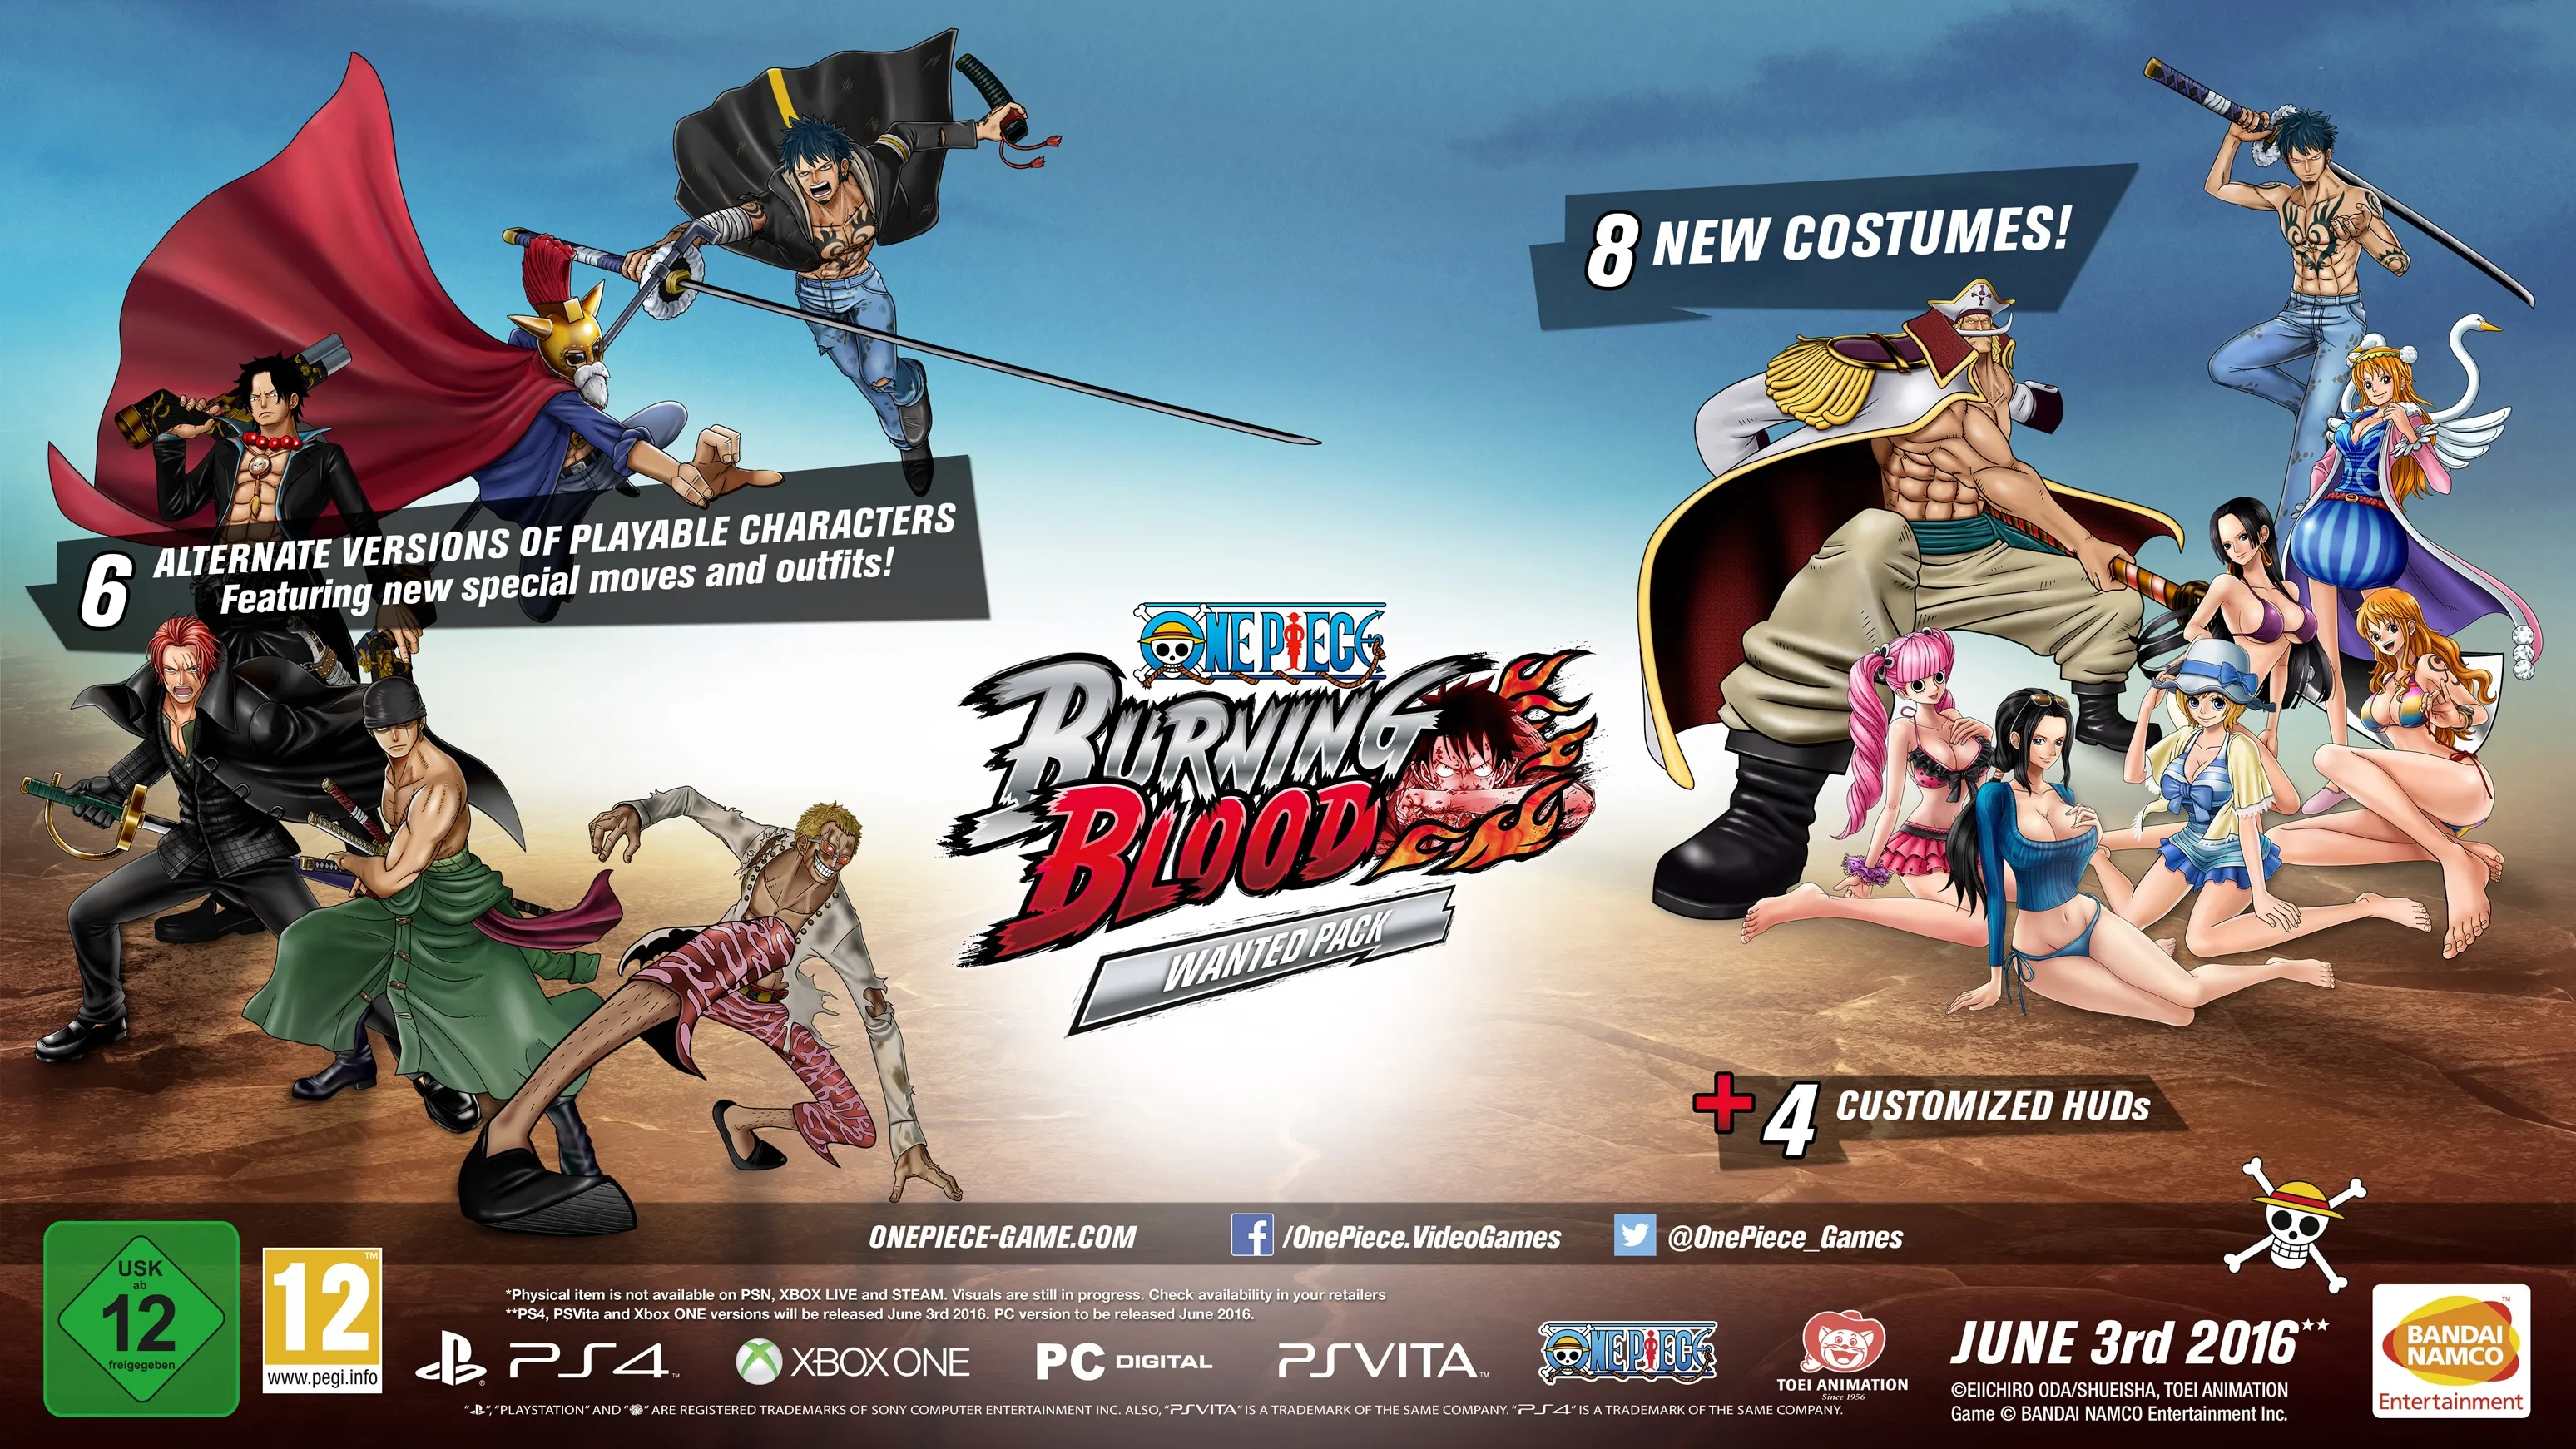 One Piece Burning Blood Digital Deluxe Edition Includes Alternate Characters Costumes And Huds Siliconera